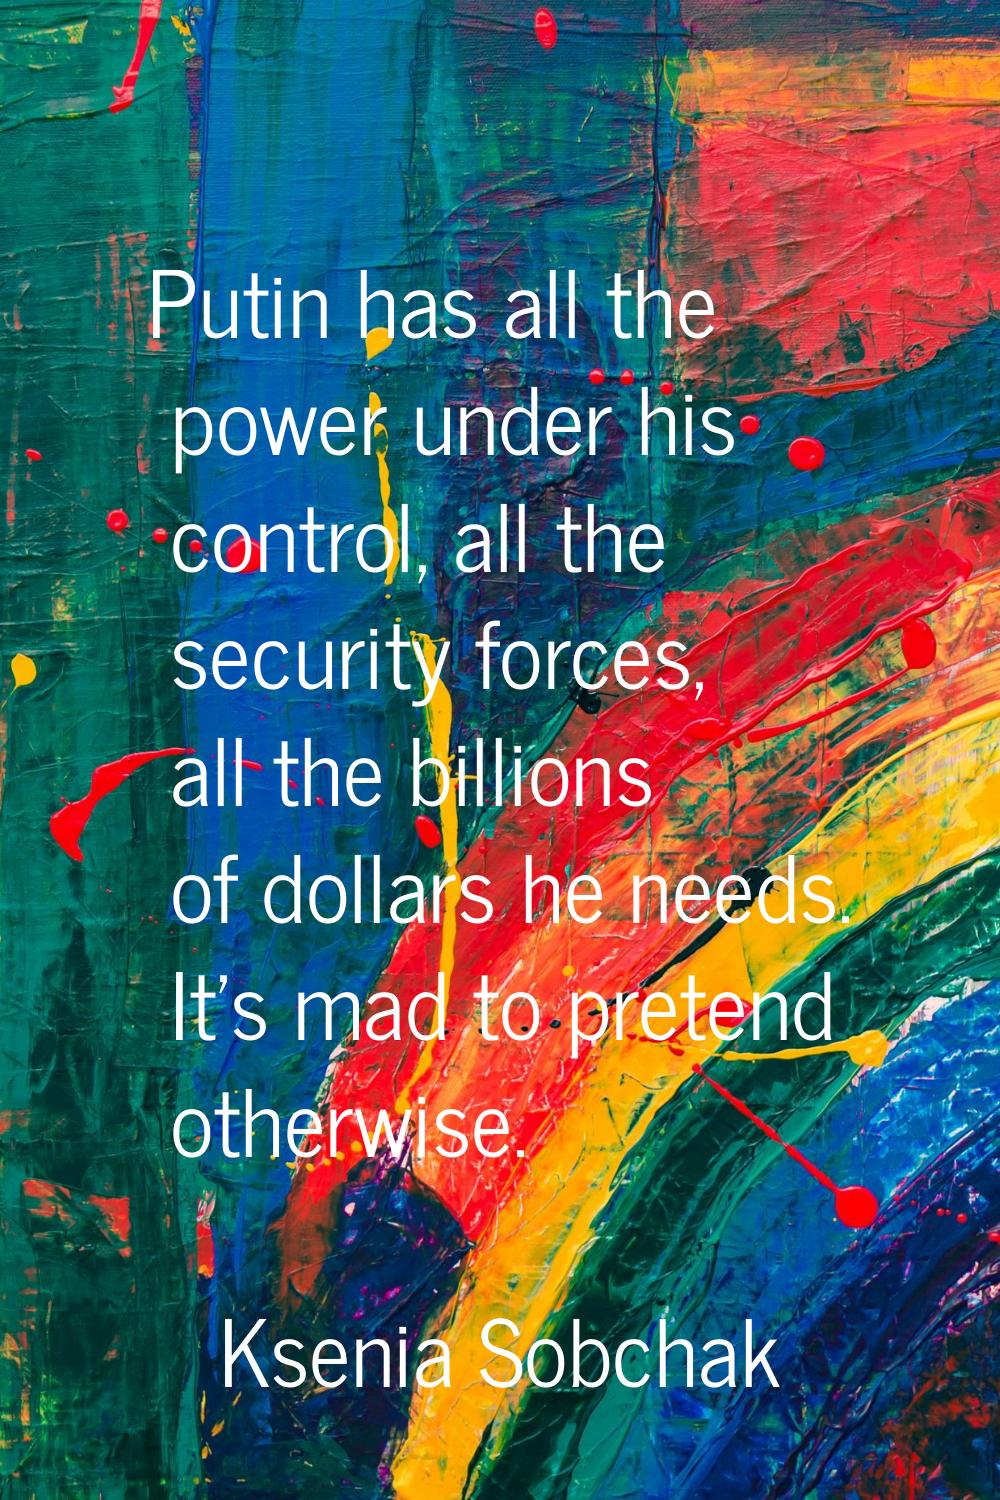 Putin has all the power under his control, all the security forces, all the billions of dollars he 